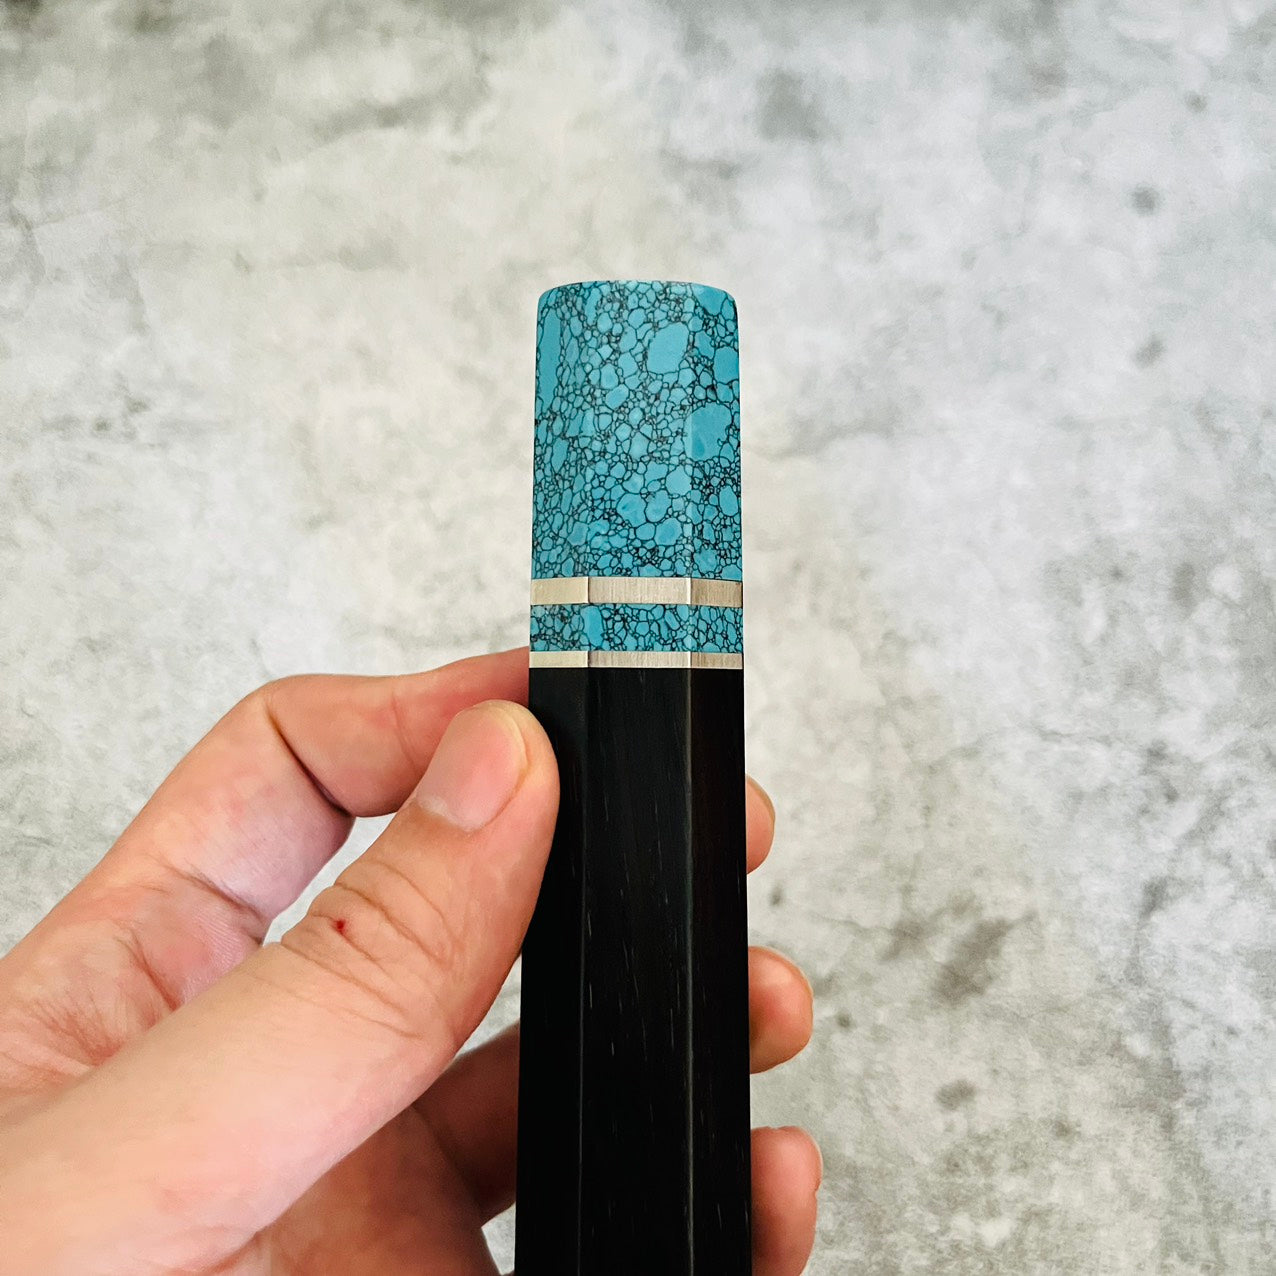 Black African Wa handle with turquoise stone Ferrule and Nickel ring